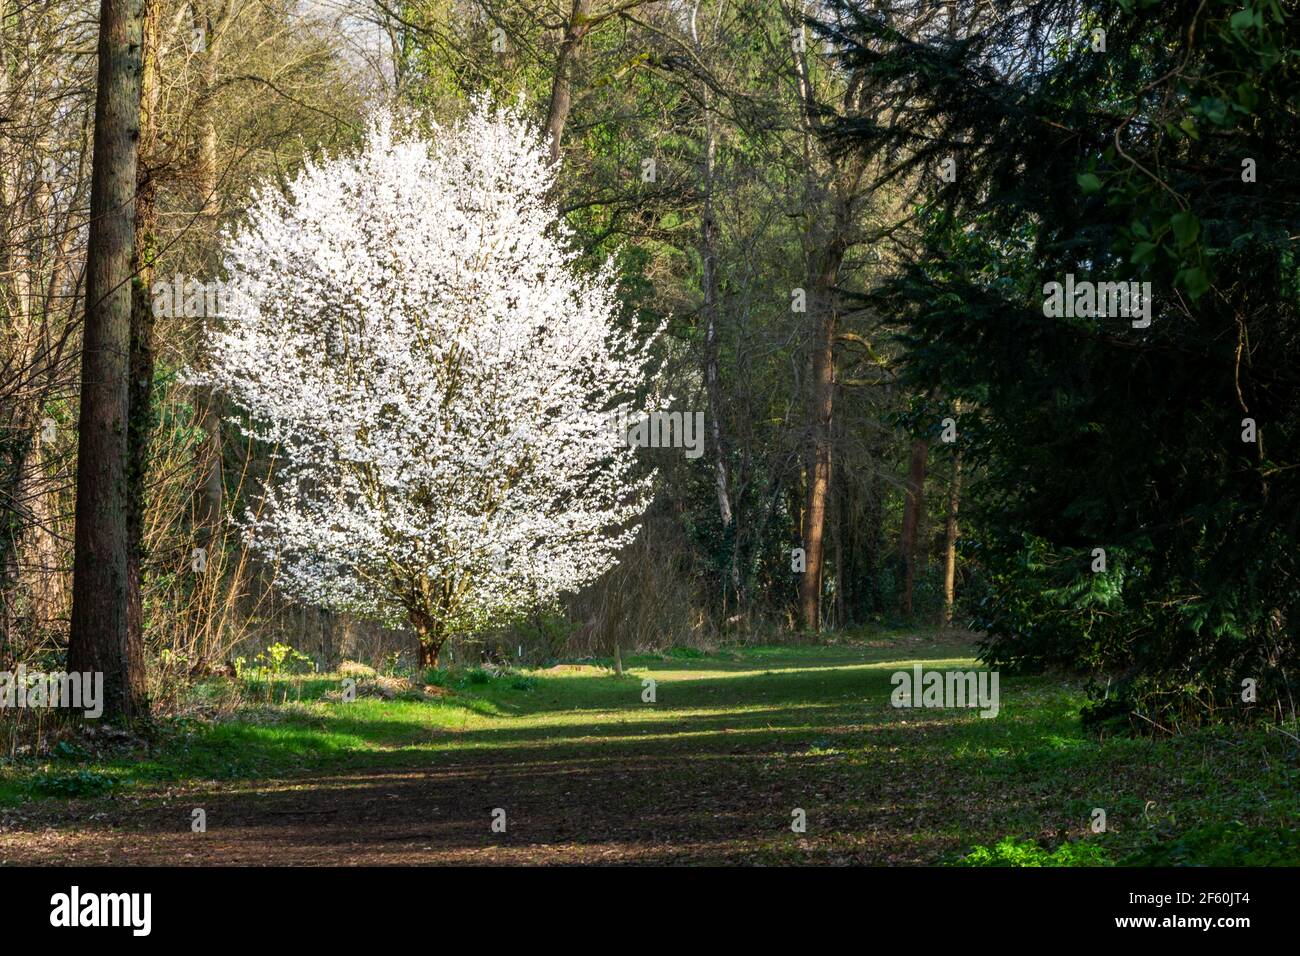 Prunus Sogdiana shrub in full flower in early spring, with a multitude of white blossom Stock Photo